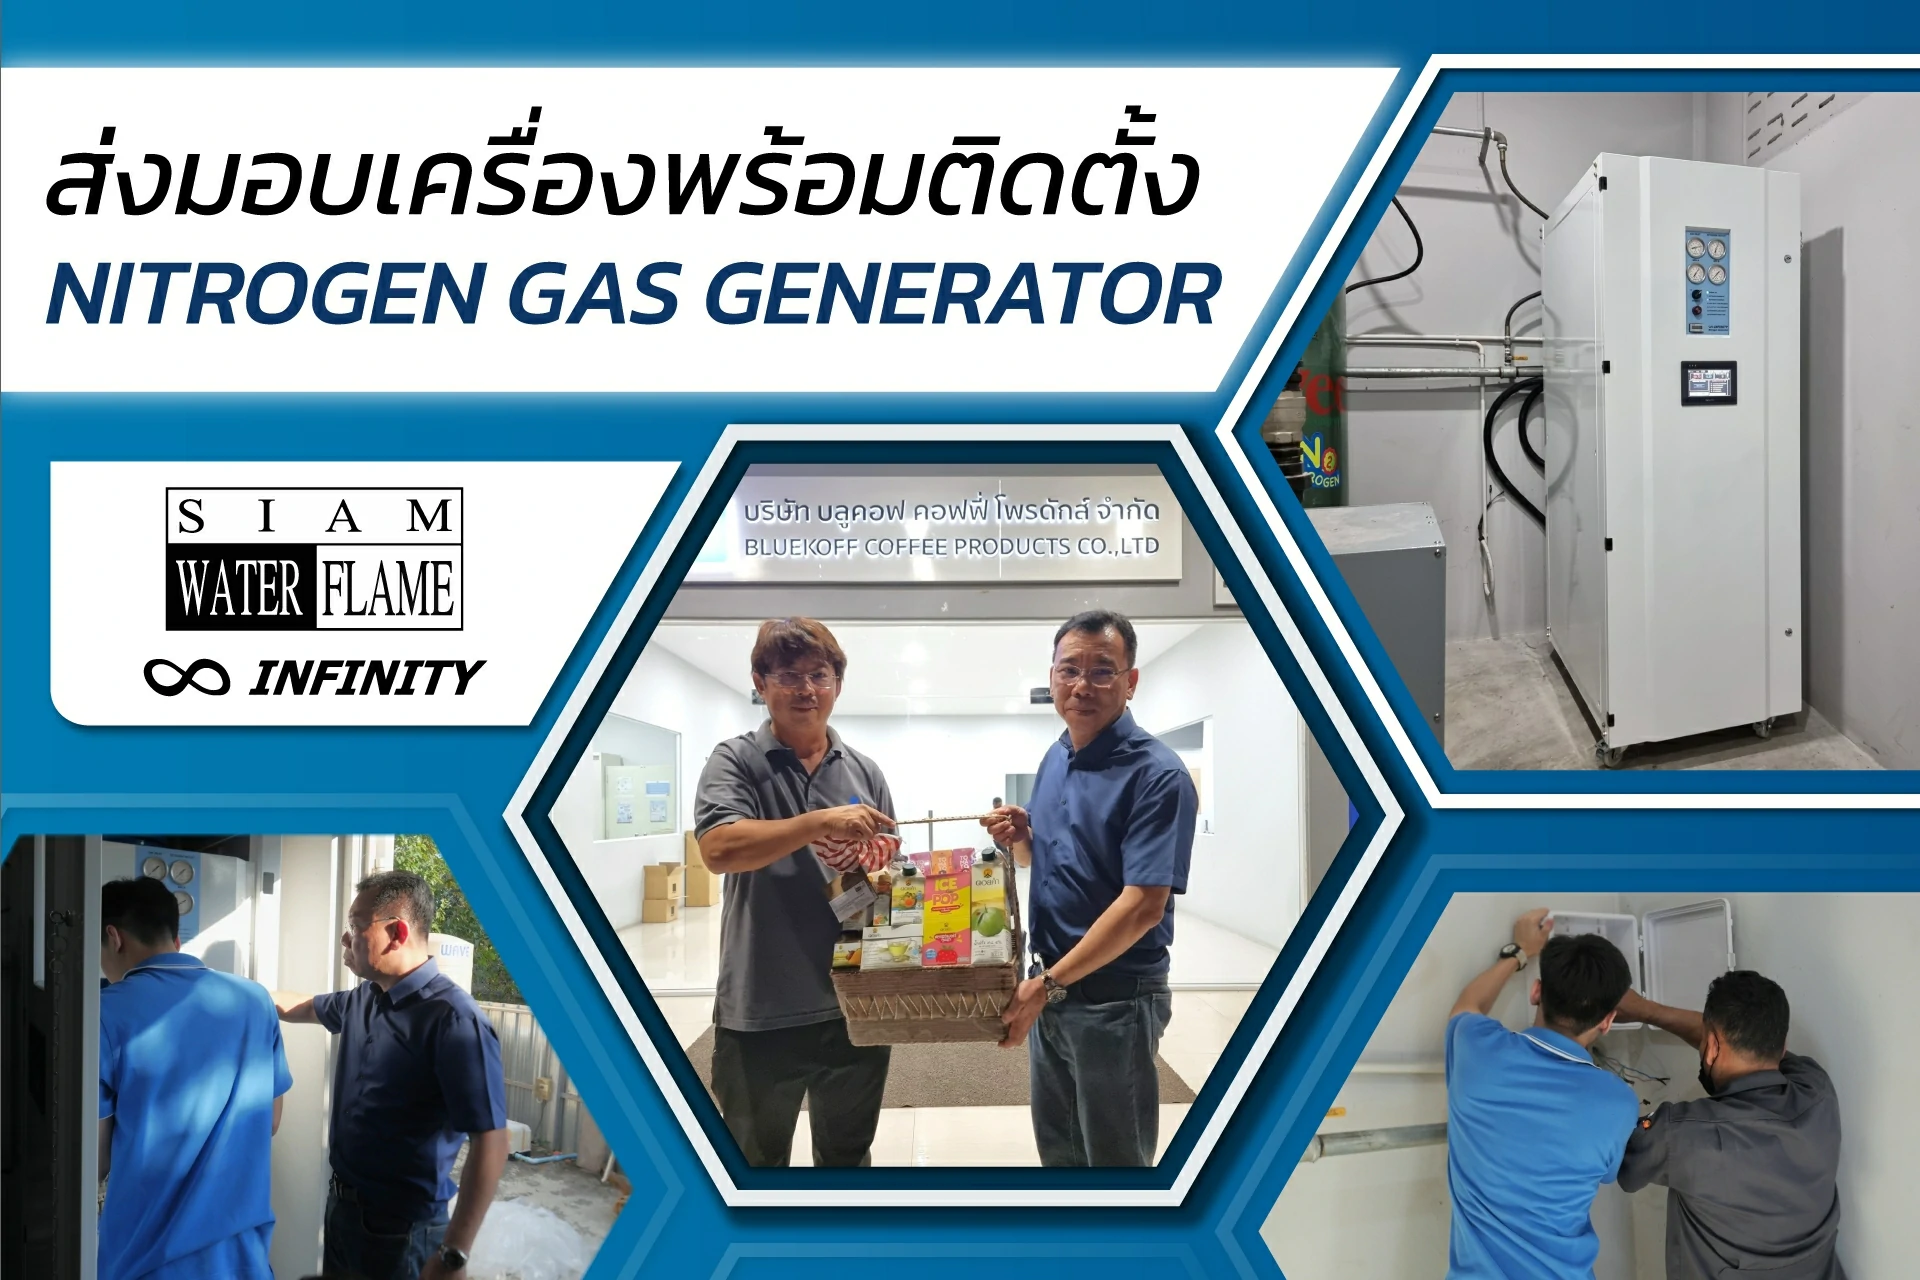 Delivery and installation of the Nitrogen Gas Generator